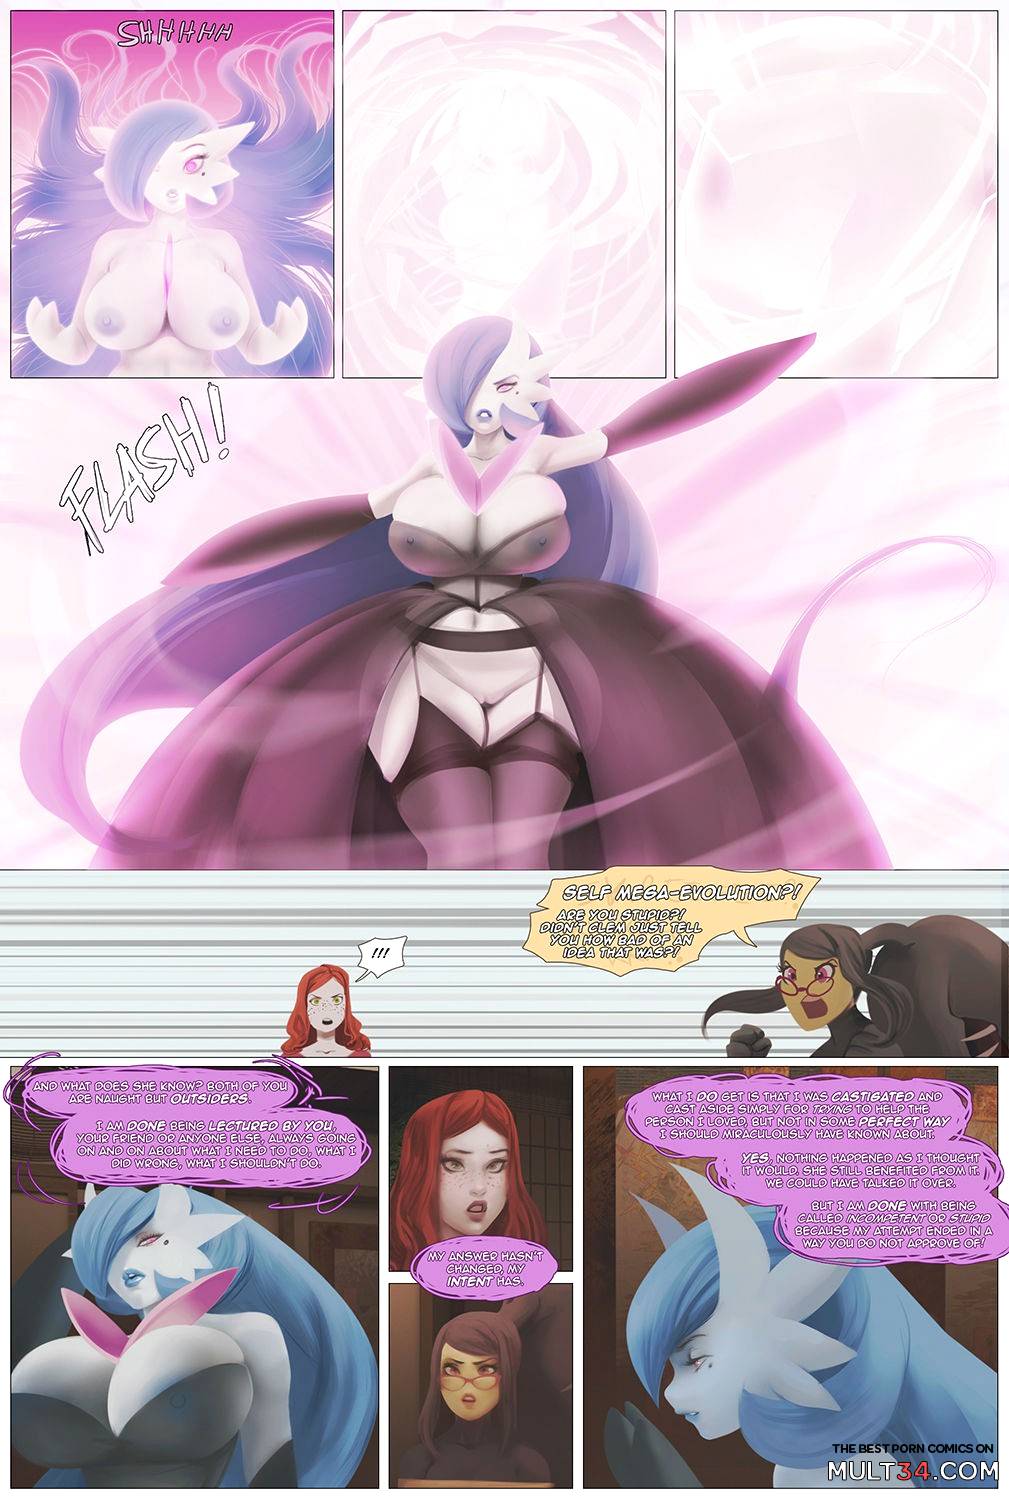 How My Gardevoir Became A Porn Star (and how it ruined my life.) Old Chapter 2 page 11